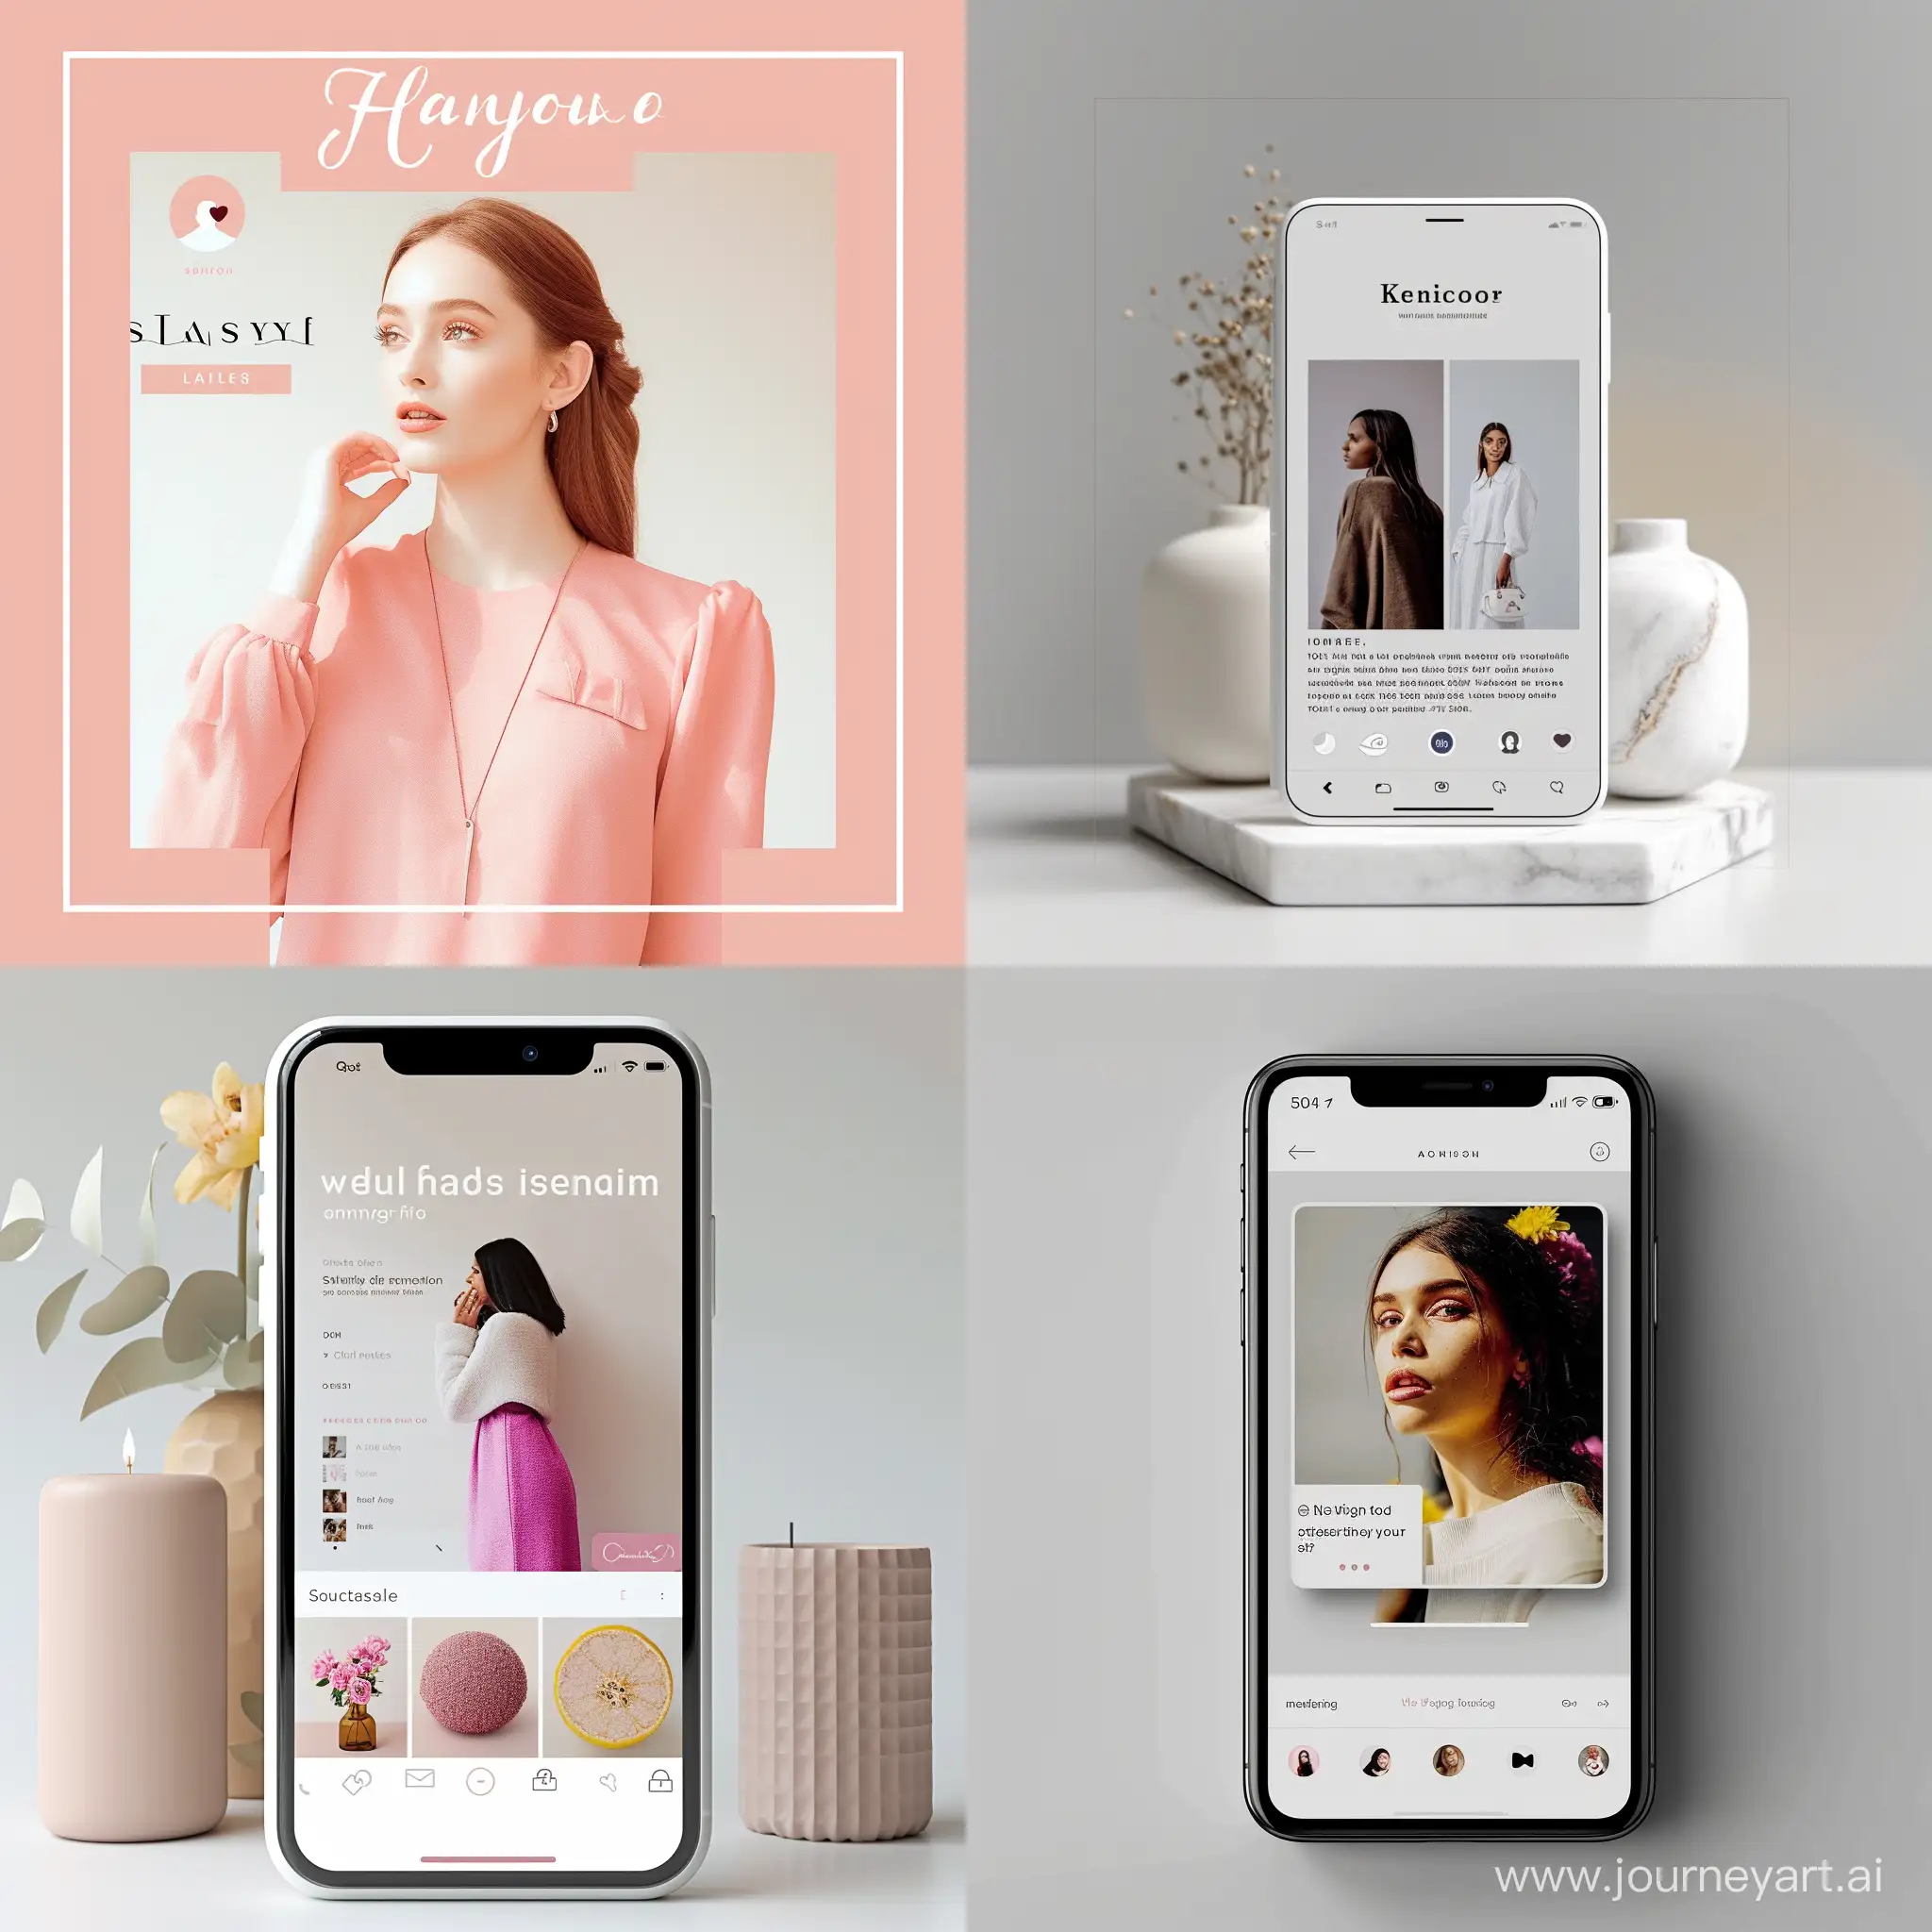 Formal-Official-Instagram-Template-with-Title-Text-Photo-and-Logo-Space-Aspect-Ratio-11